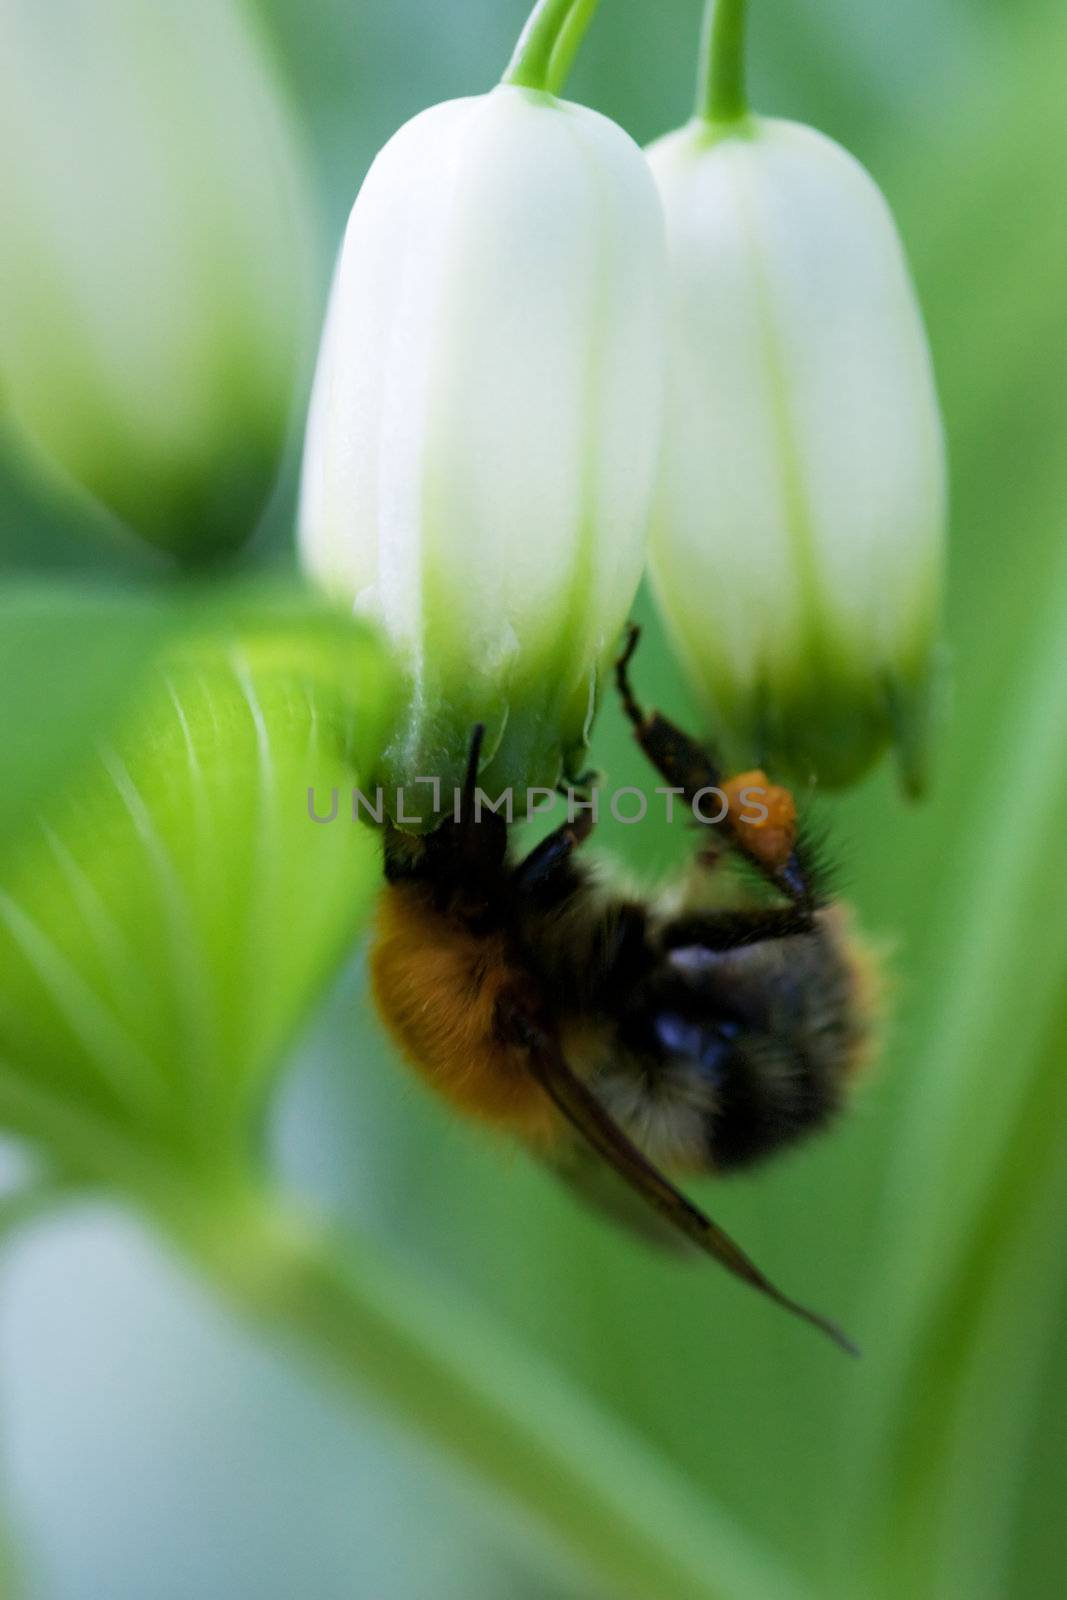 Hairy bumblebee on a closed bud. Macro view.